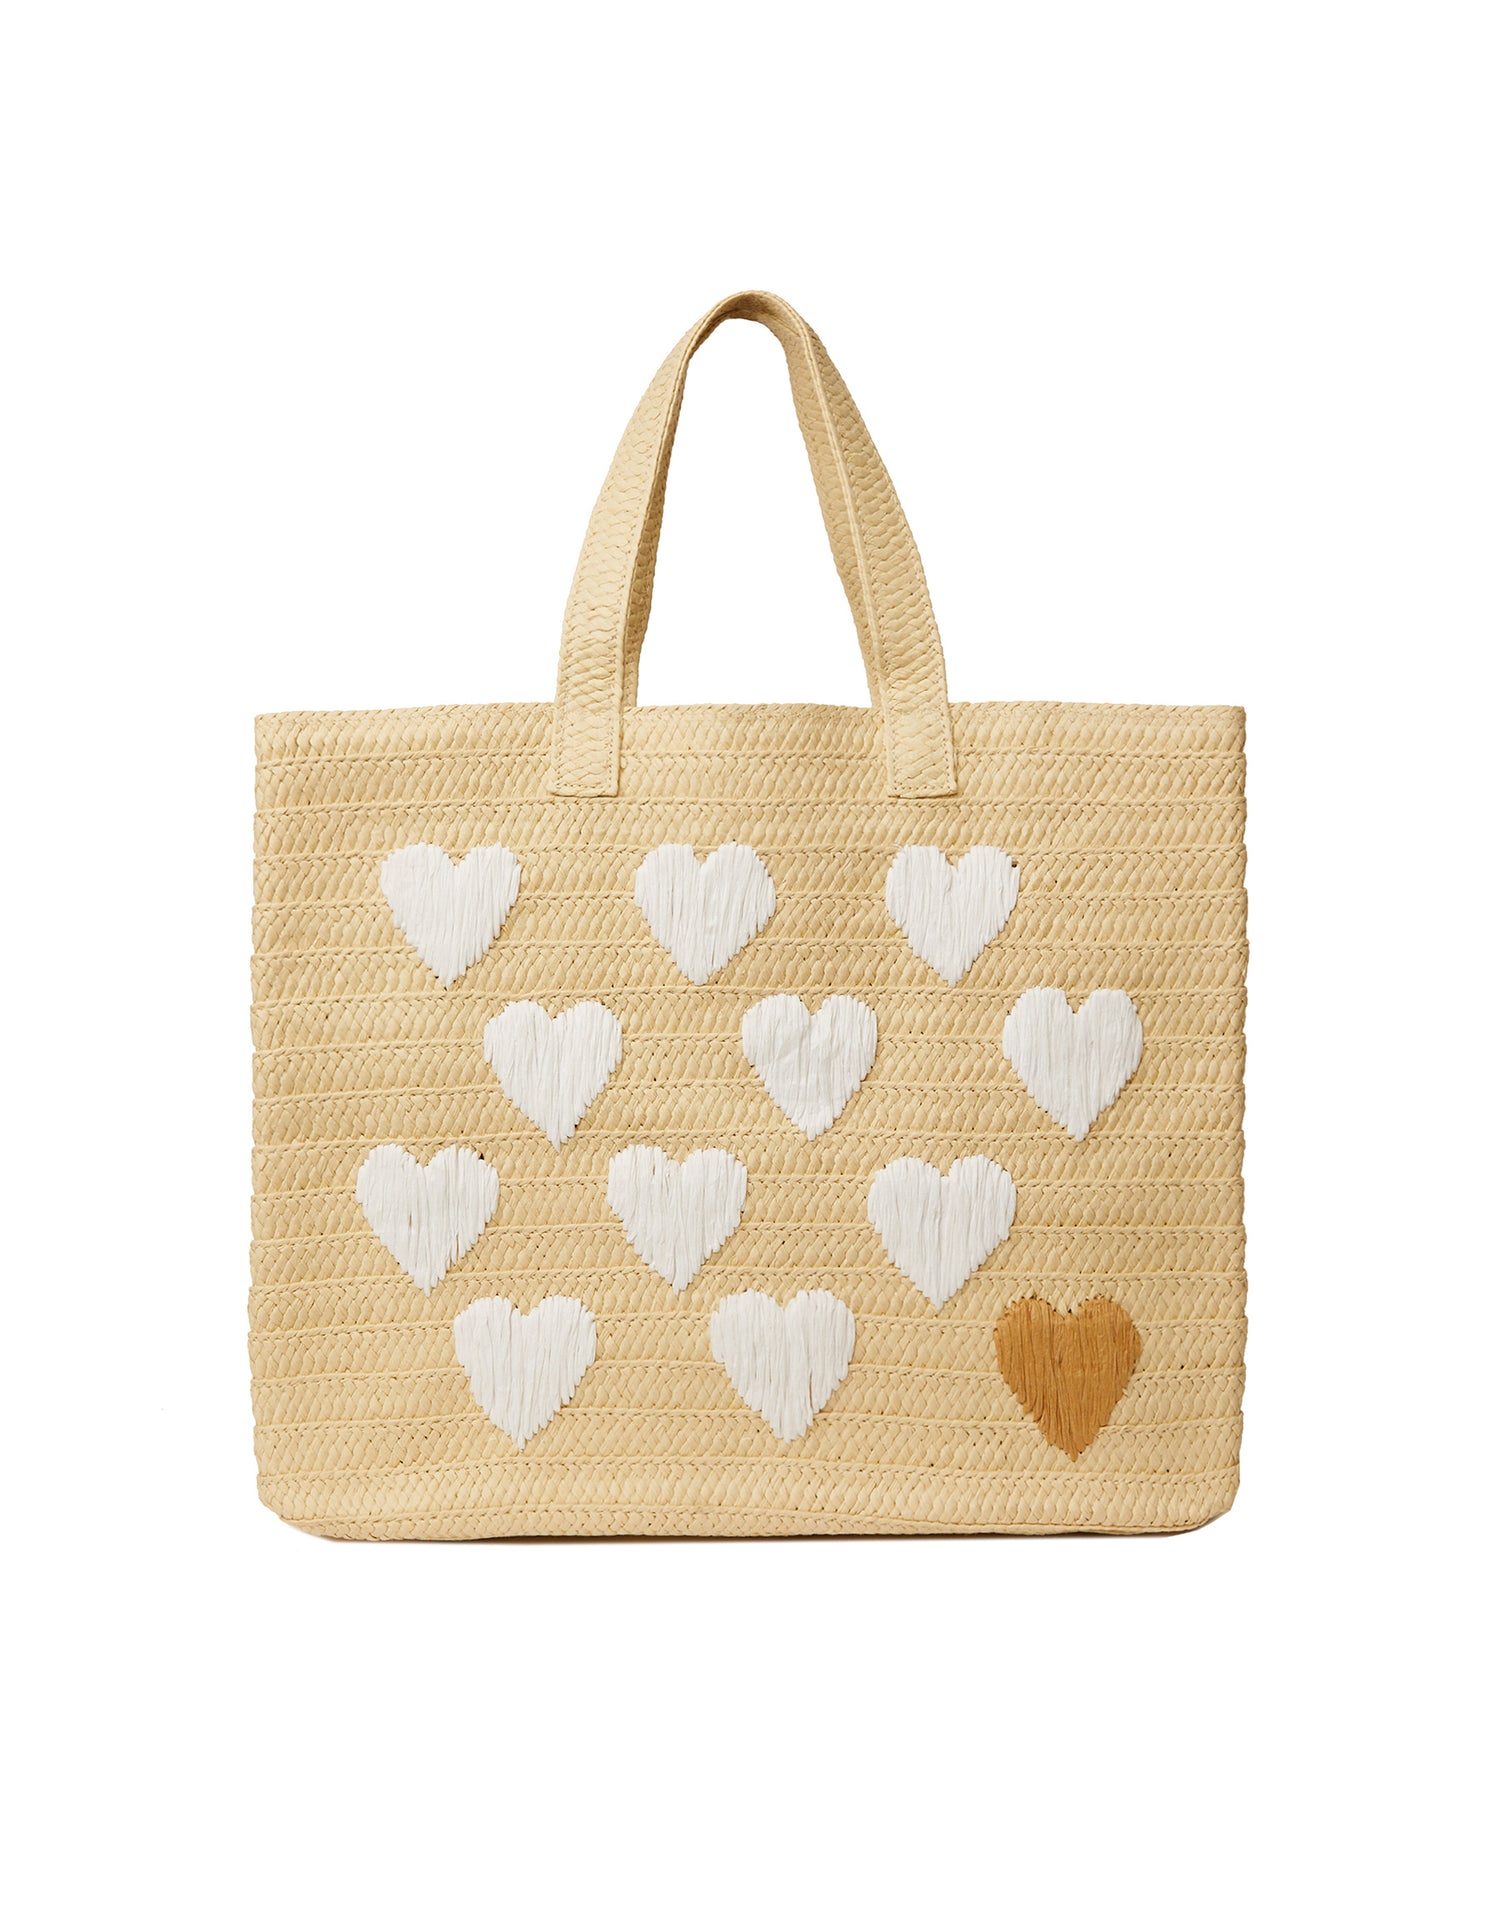 Be Mine Tote in Natural/White by BTB Los Angeles - Product View